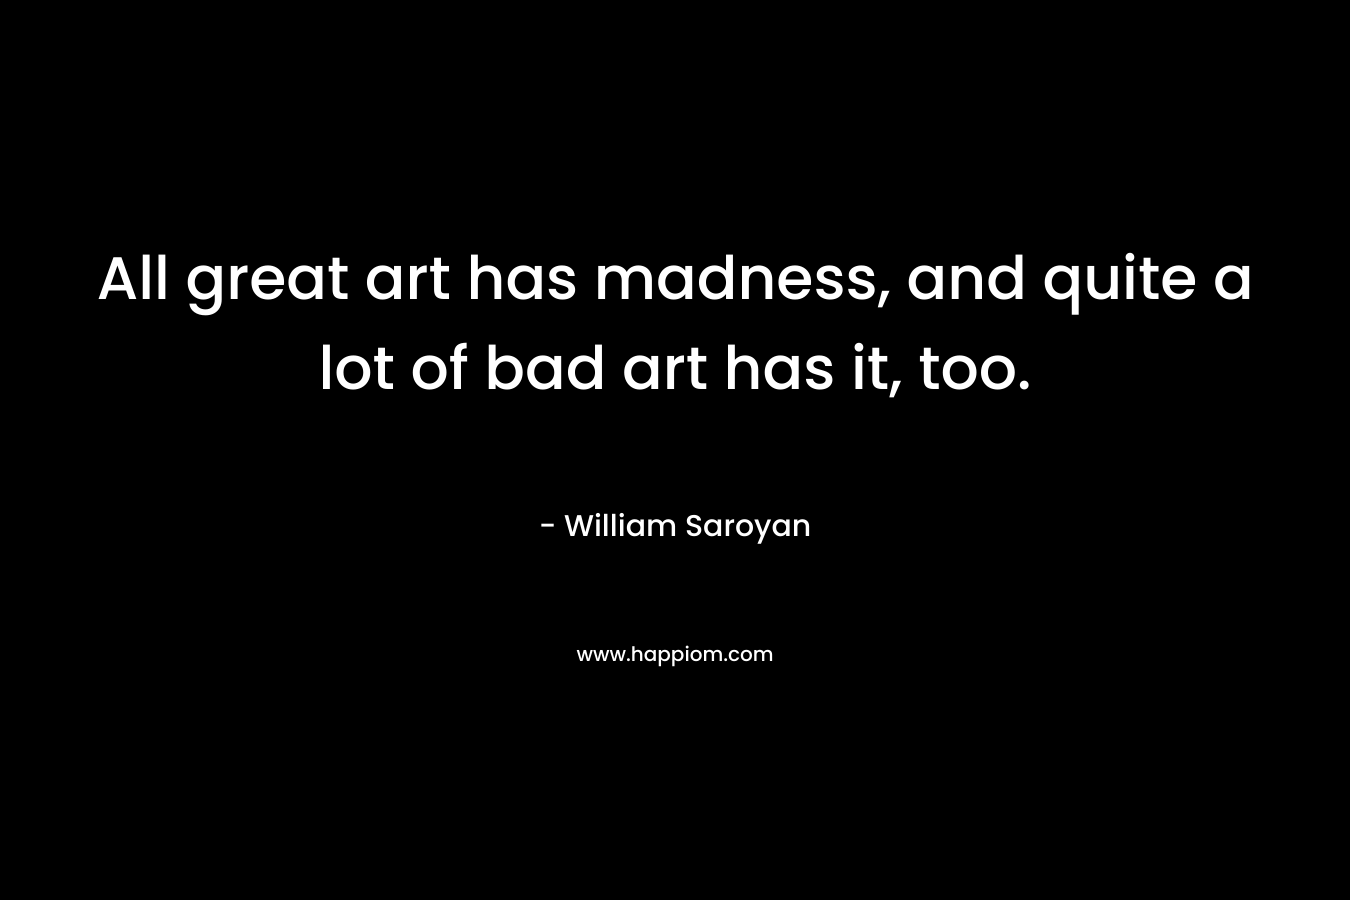 All great art has madness, and quite a lot of bad art has it, too.